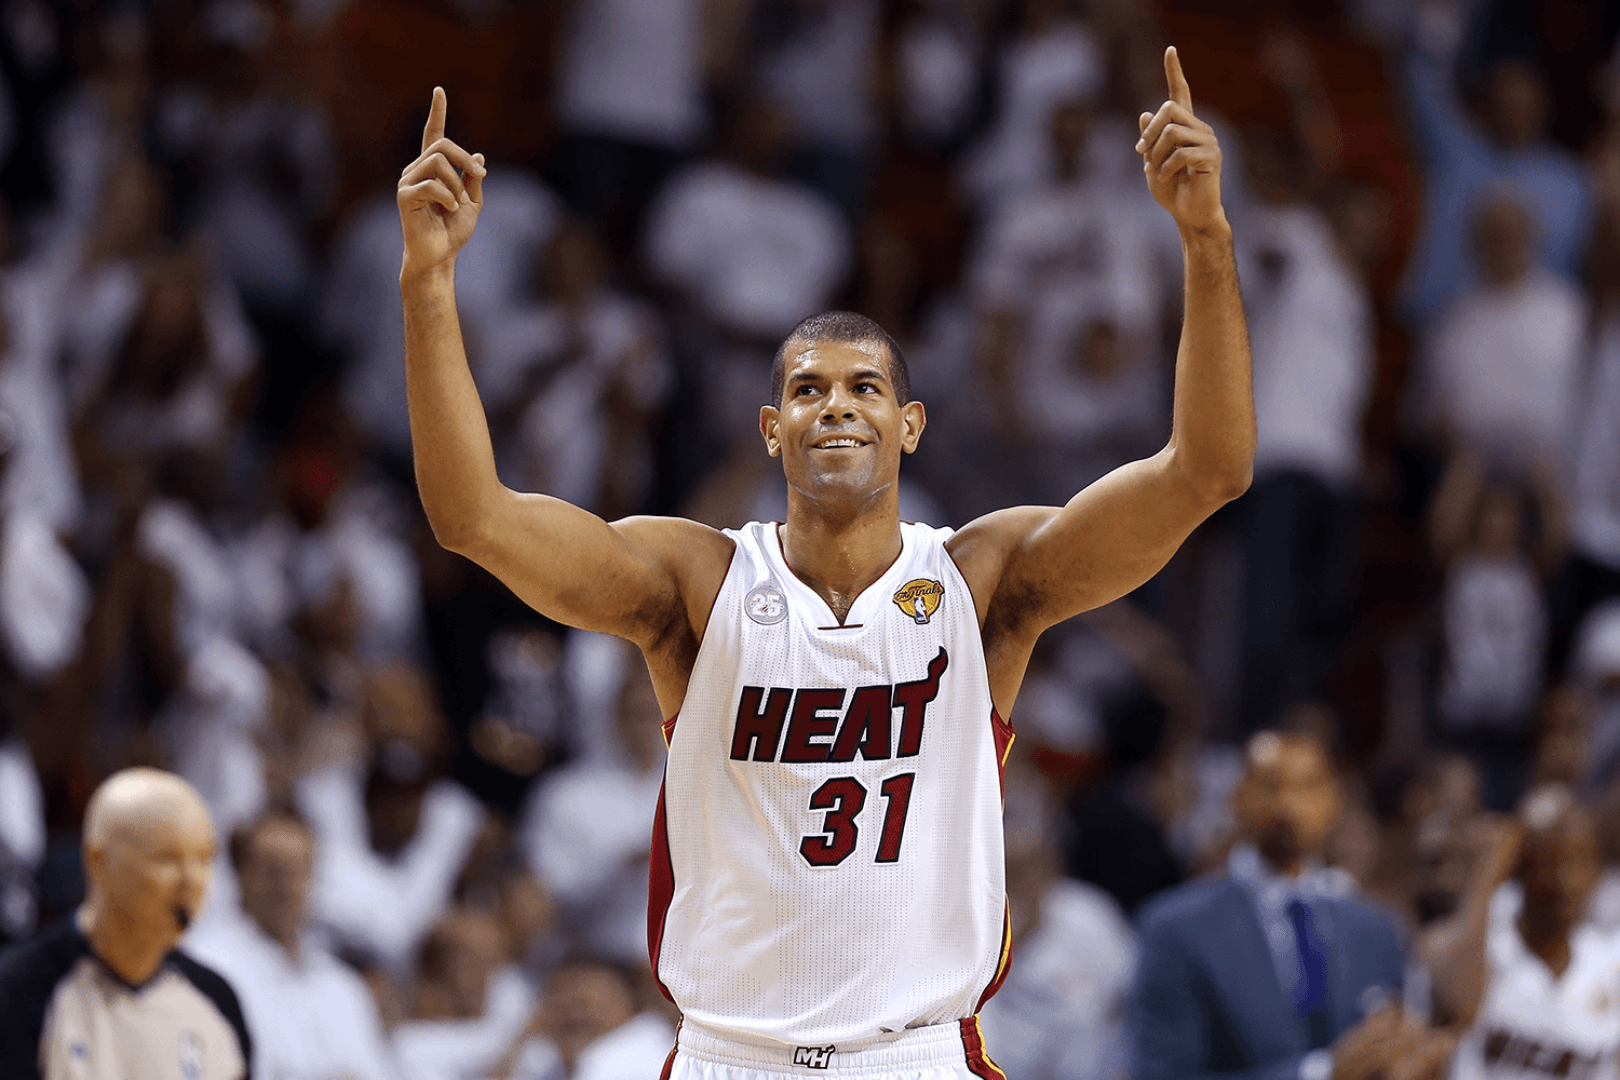 Shane Battier ACC Defensive Player of the Year jerseys